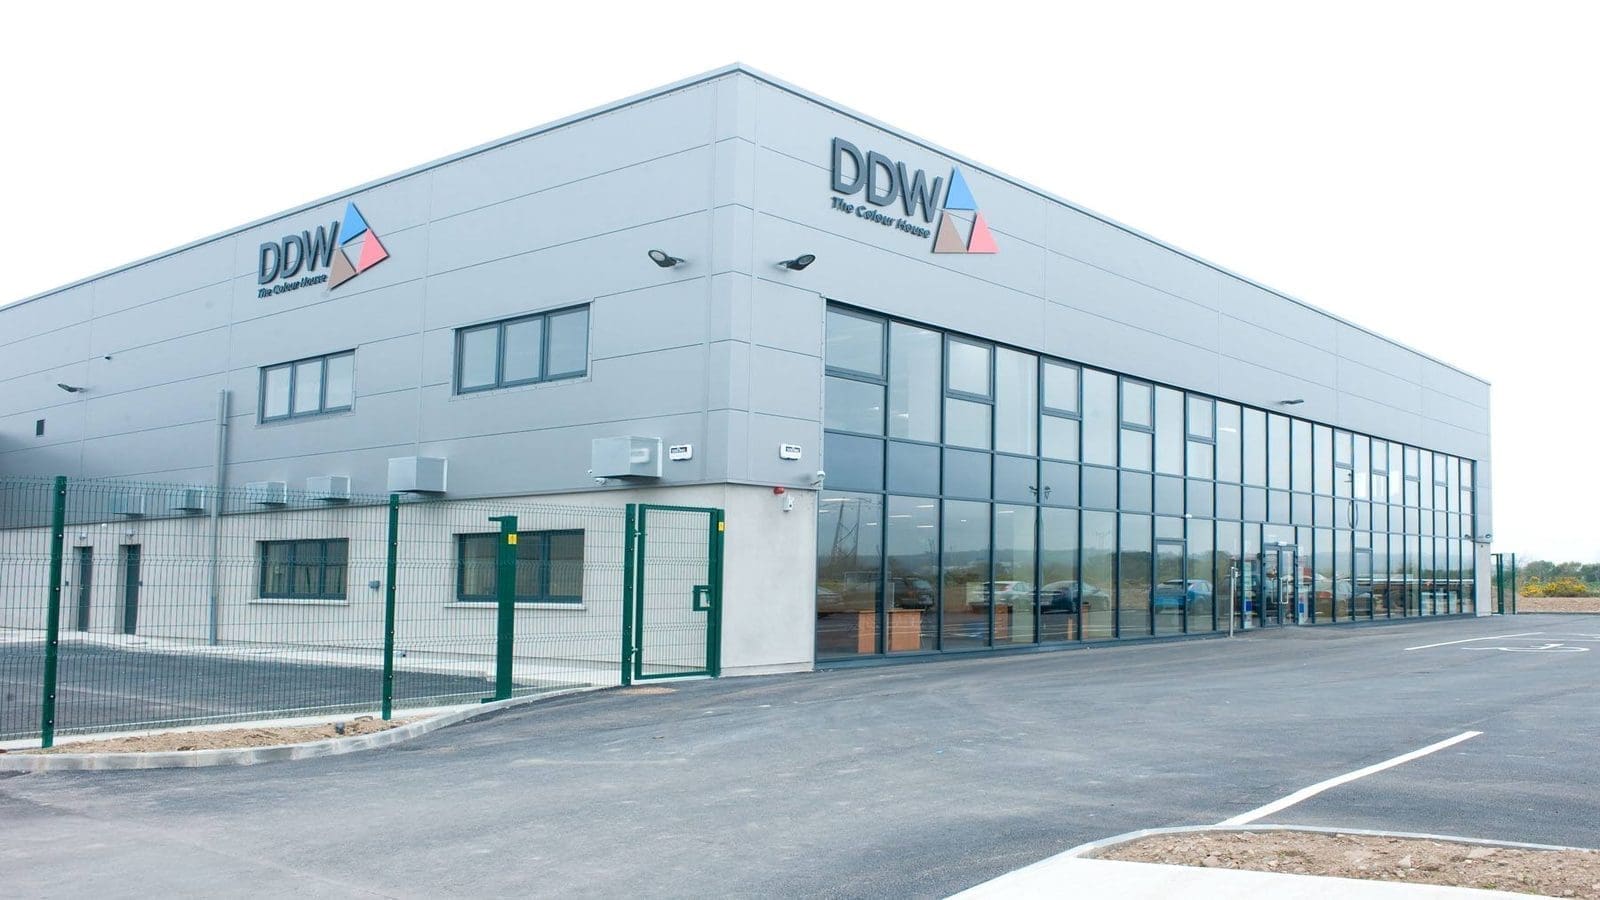 Givaudan to acquire DDW to bolsters position in US natural colors market